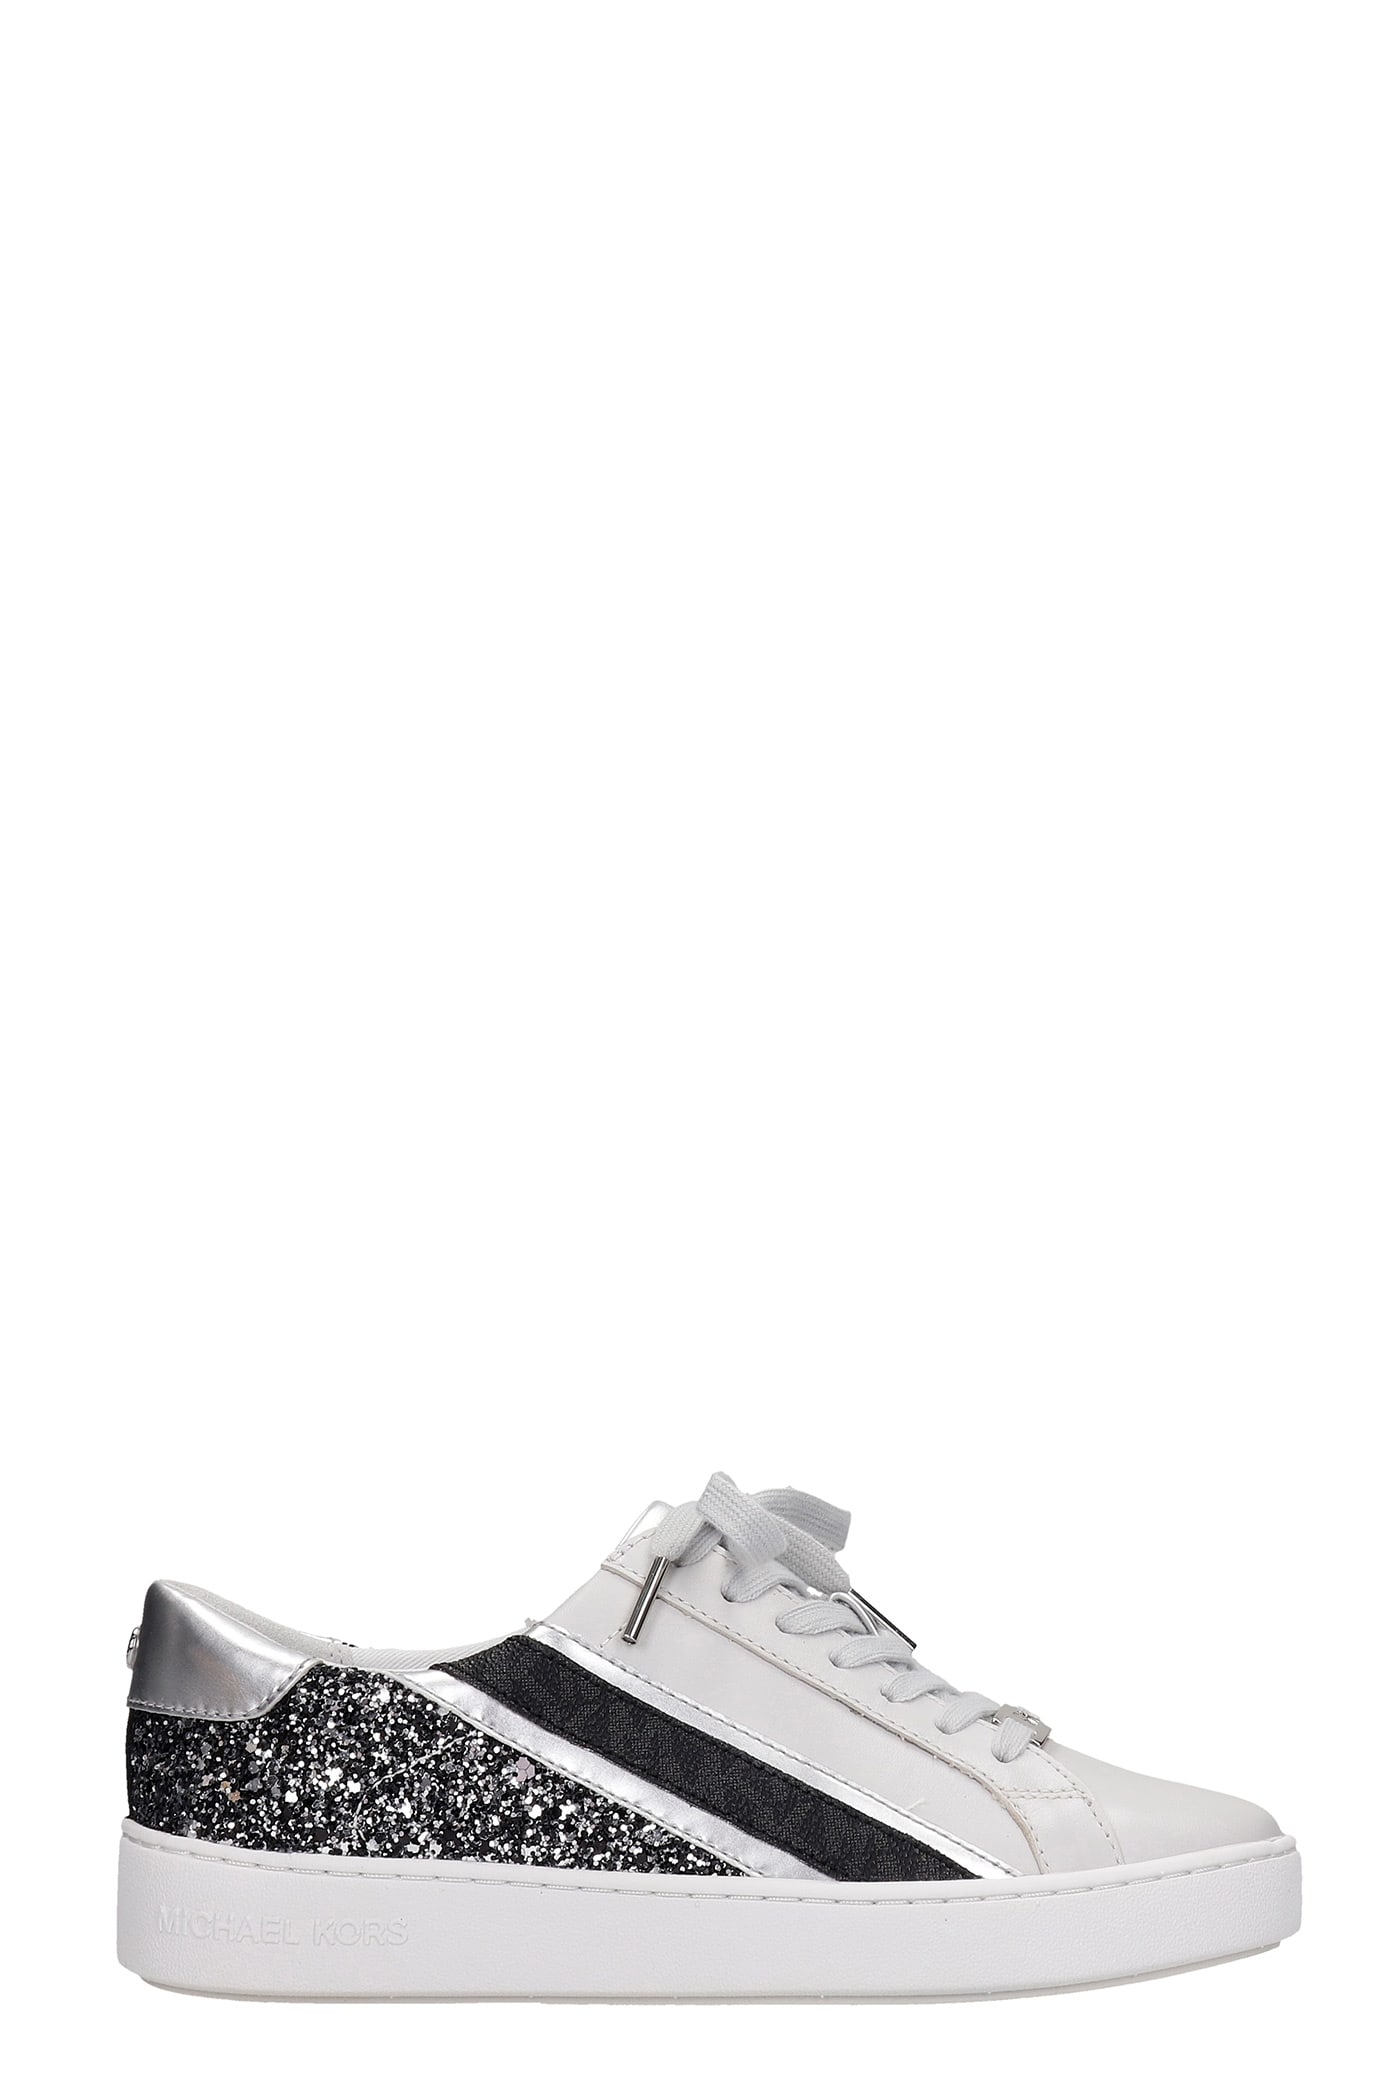 Buy Michael Kors Slate Sneakers In Grey Leather online, shop Michael Kors shoes with free shipping